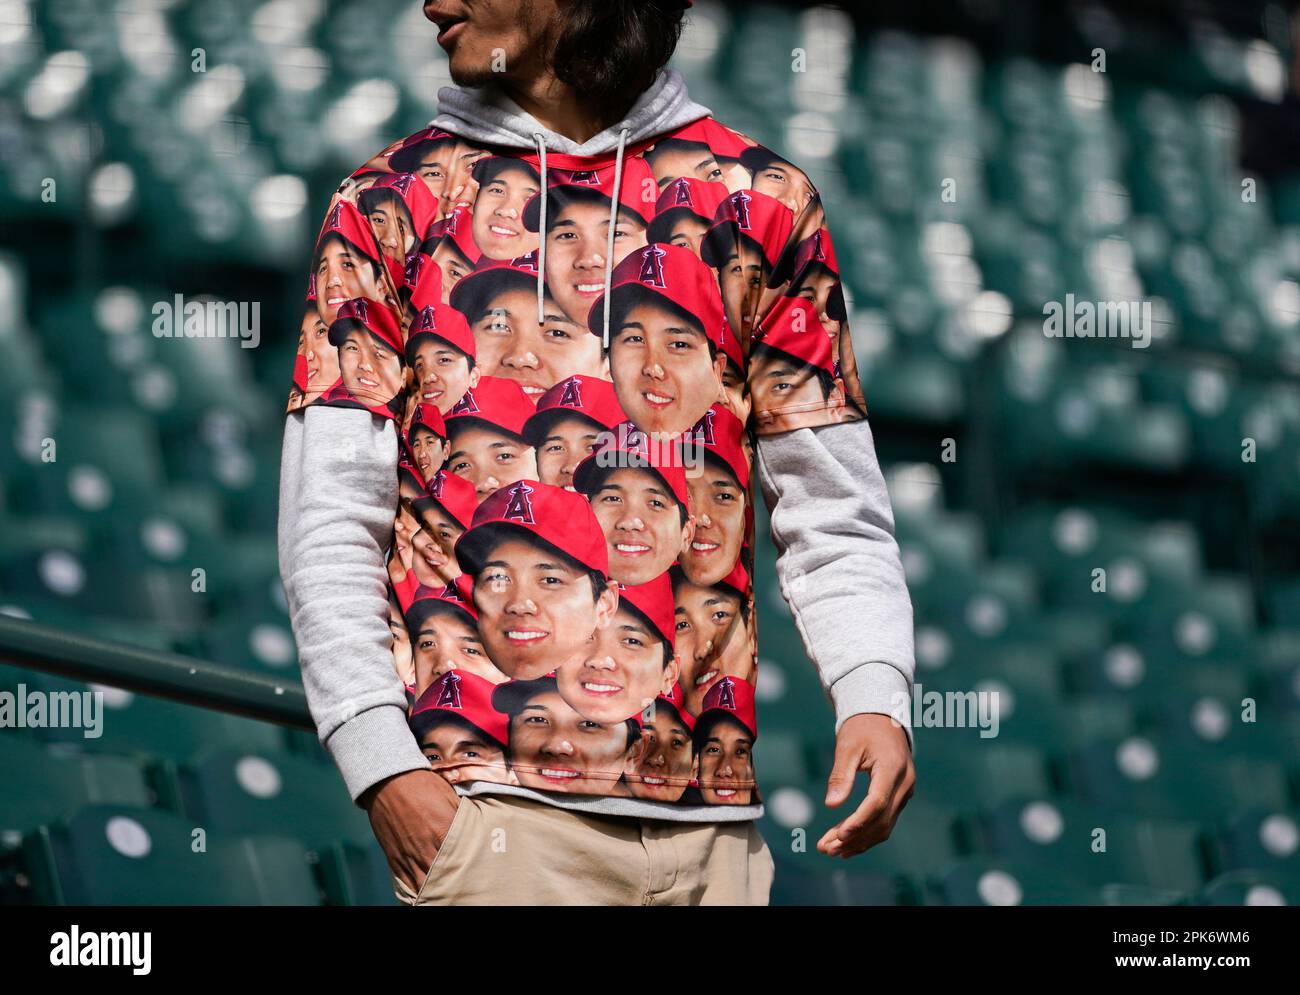 A fan wears a shirt with the face of Los Angeles Angels' Shohei